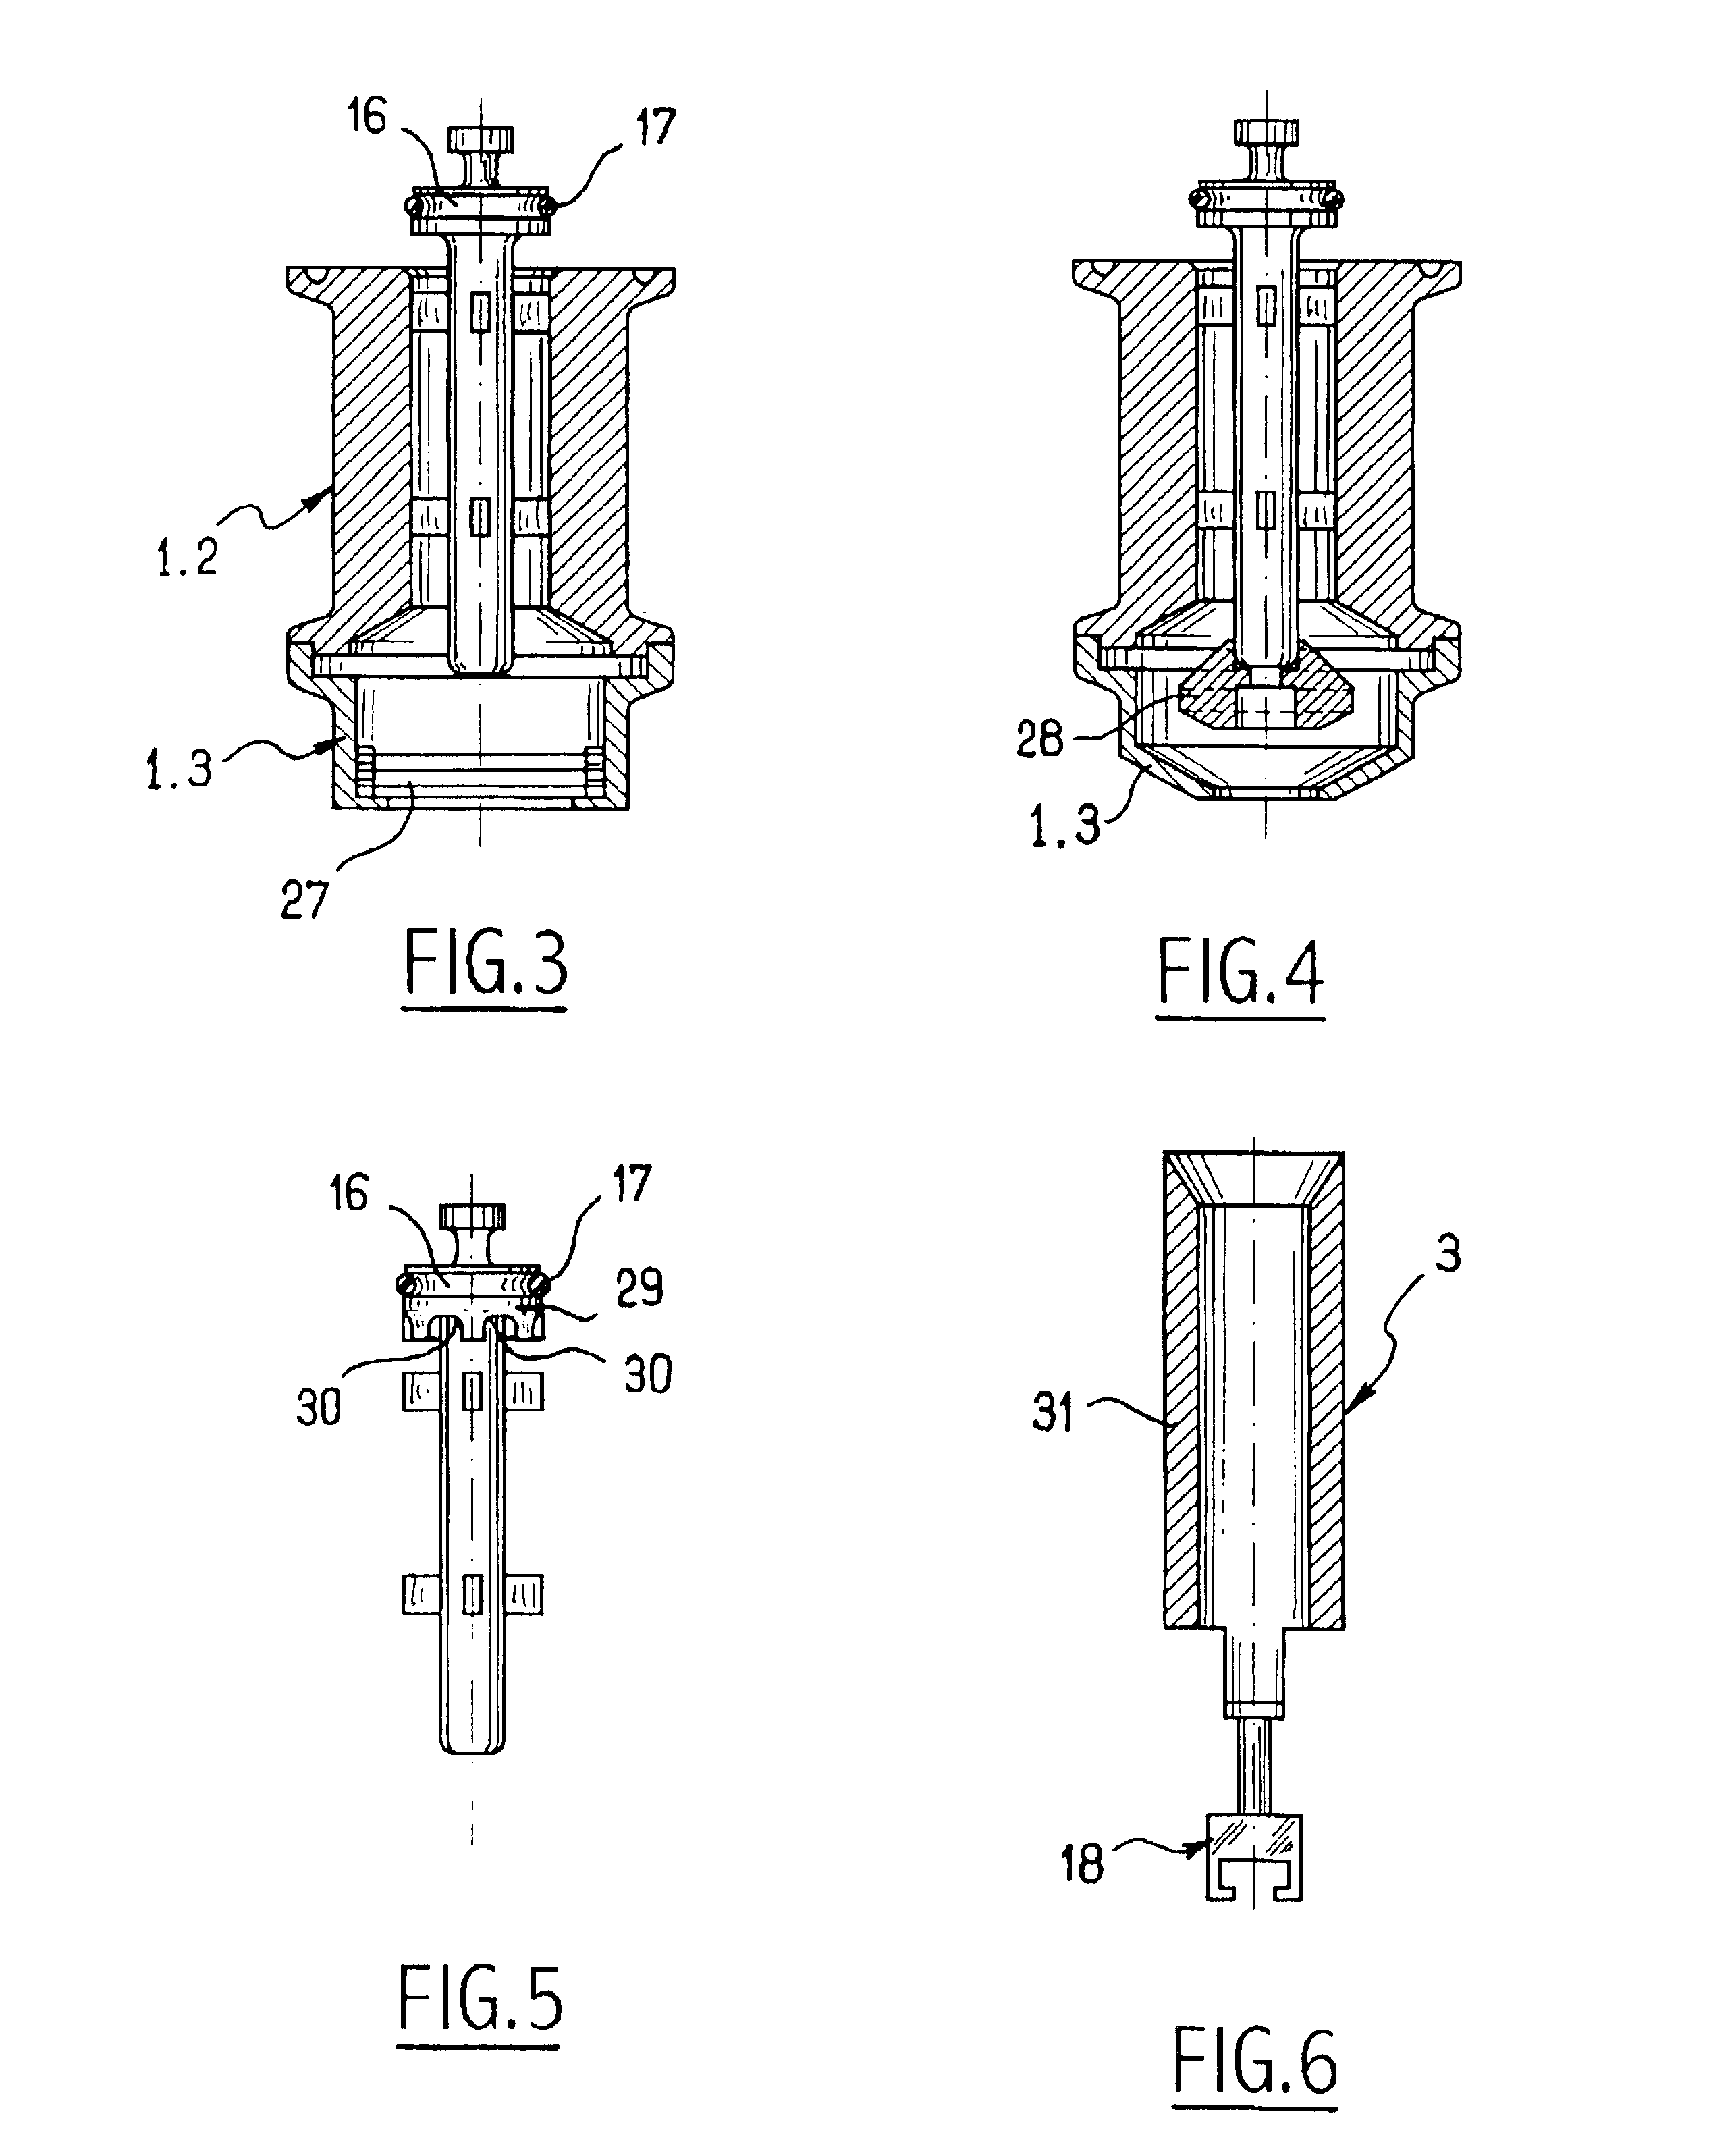 Electromagnetically-controlled filler spout